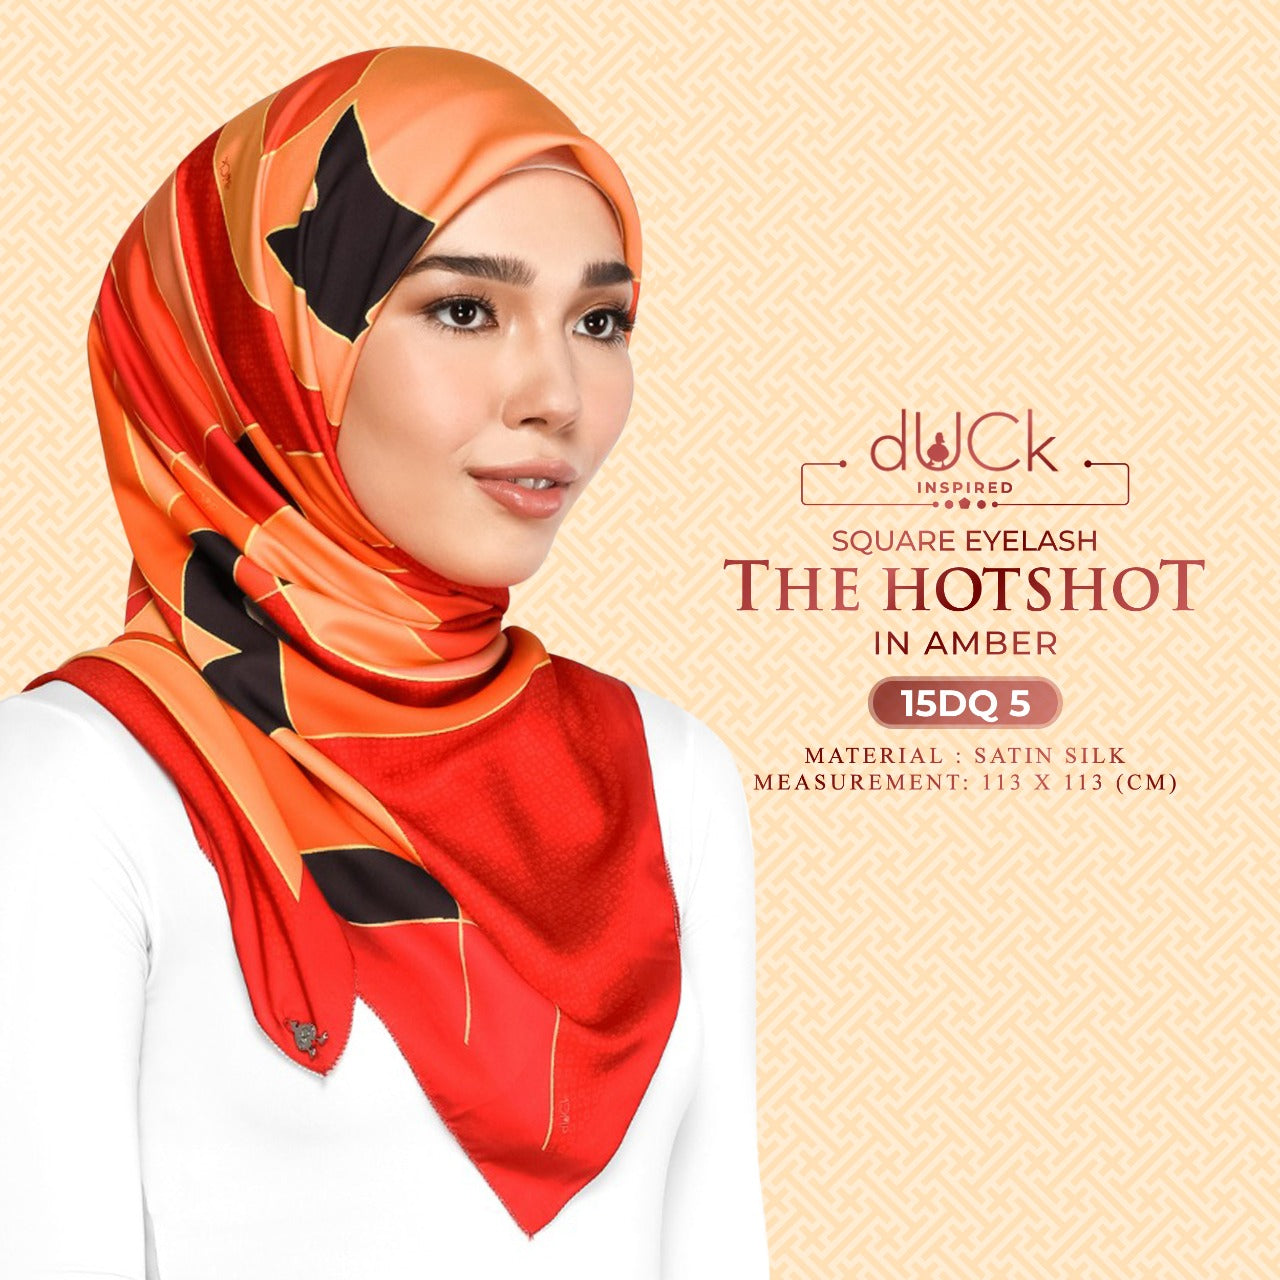 The Hotshot dUCk Square Eyelash Collection RM14